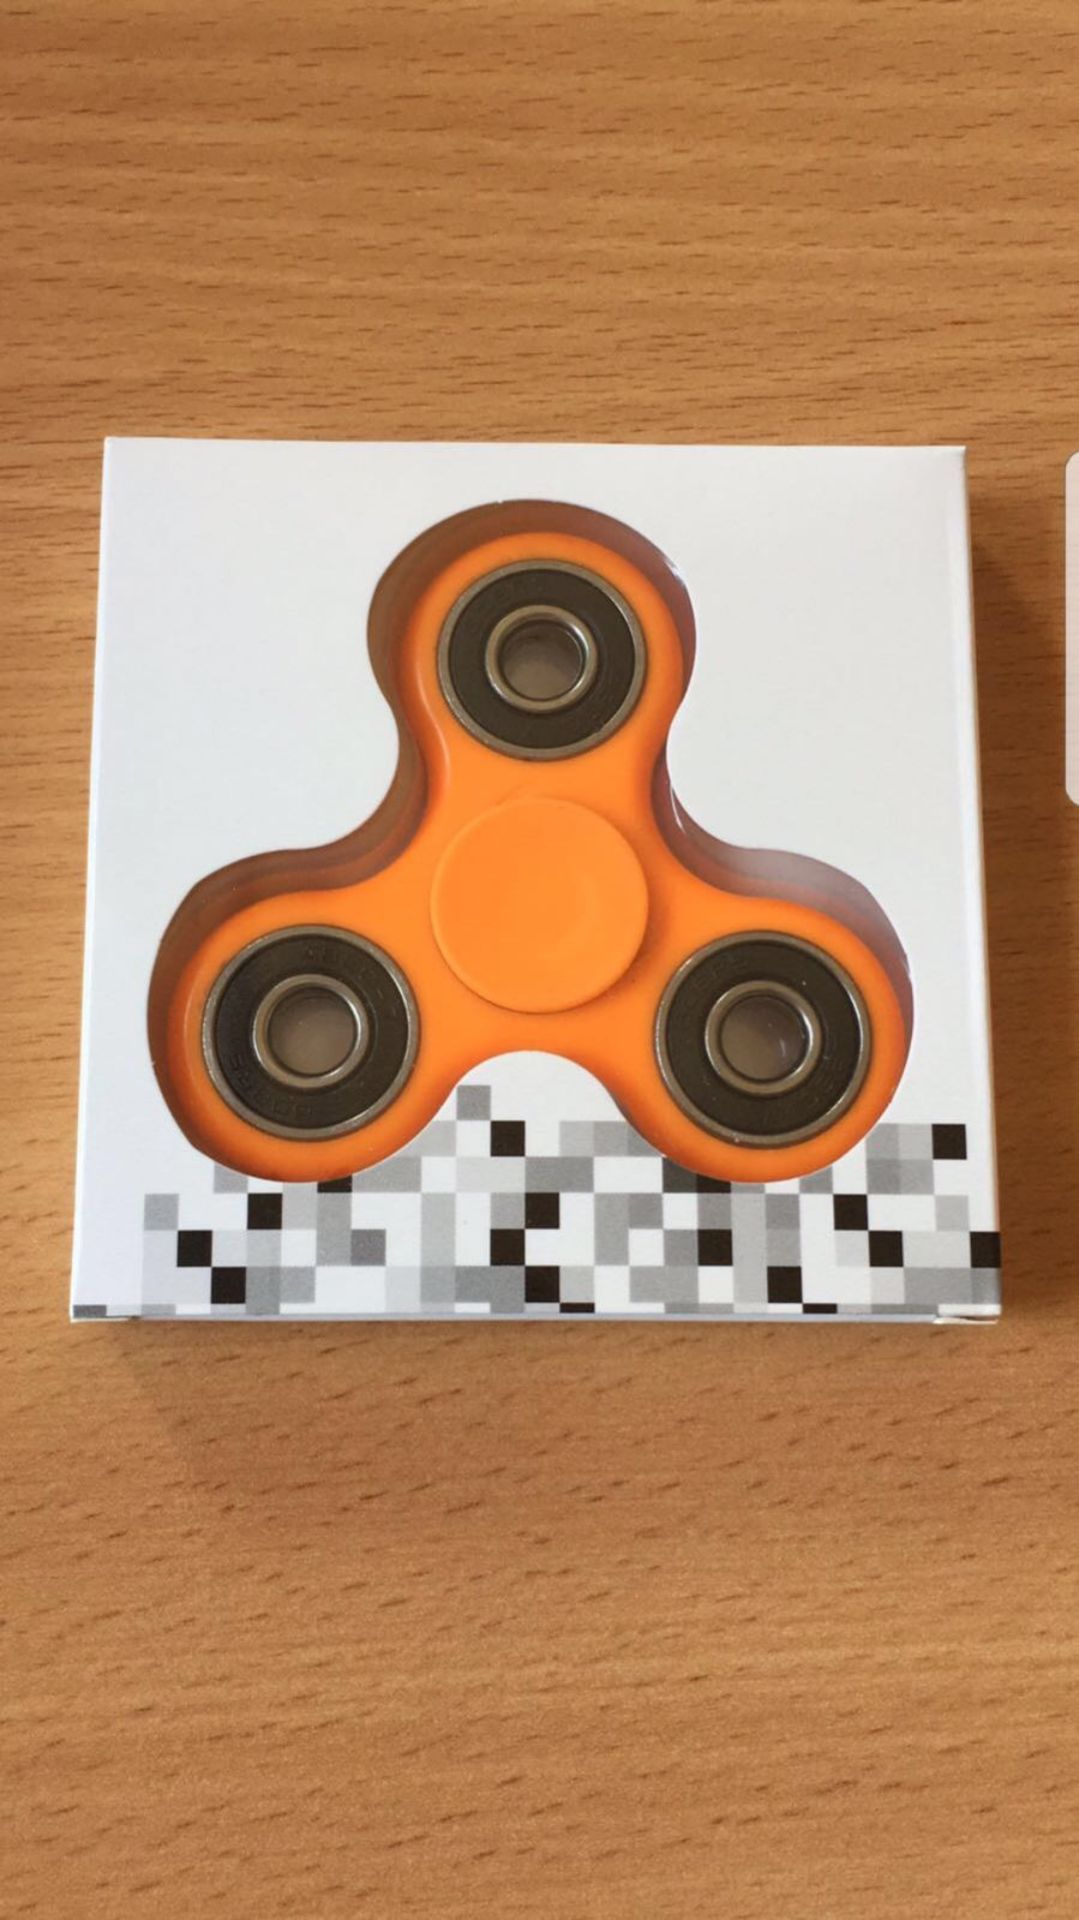 100 x Fidget Spinners. Various Colours Including: Black, Orange, Blue & Yellow. RRP £9.99 each. Come - Image 2 of 2